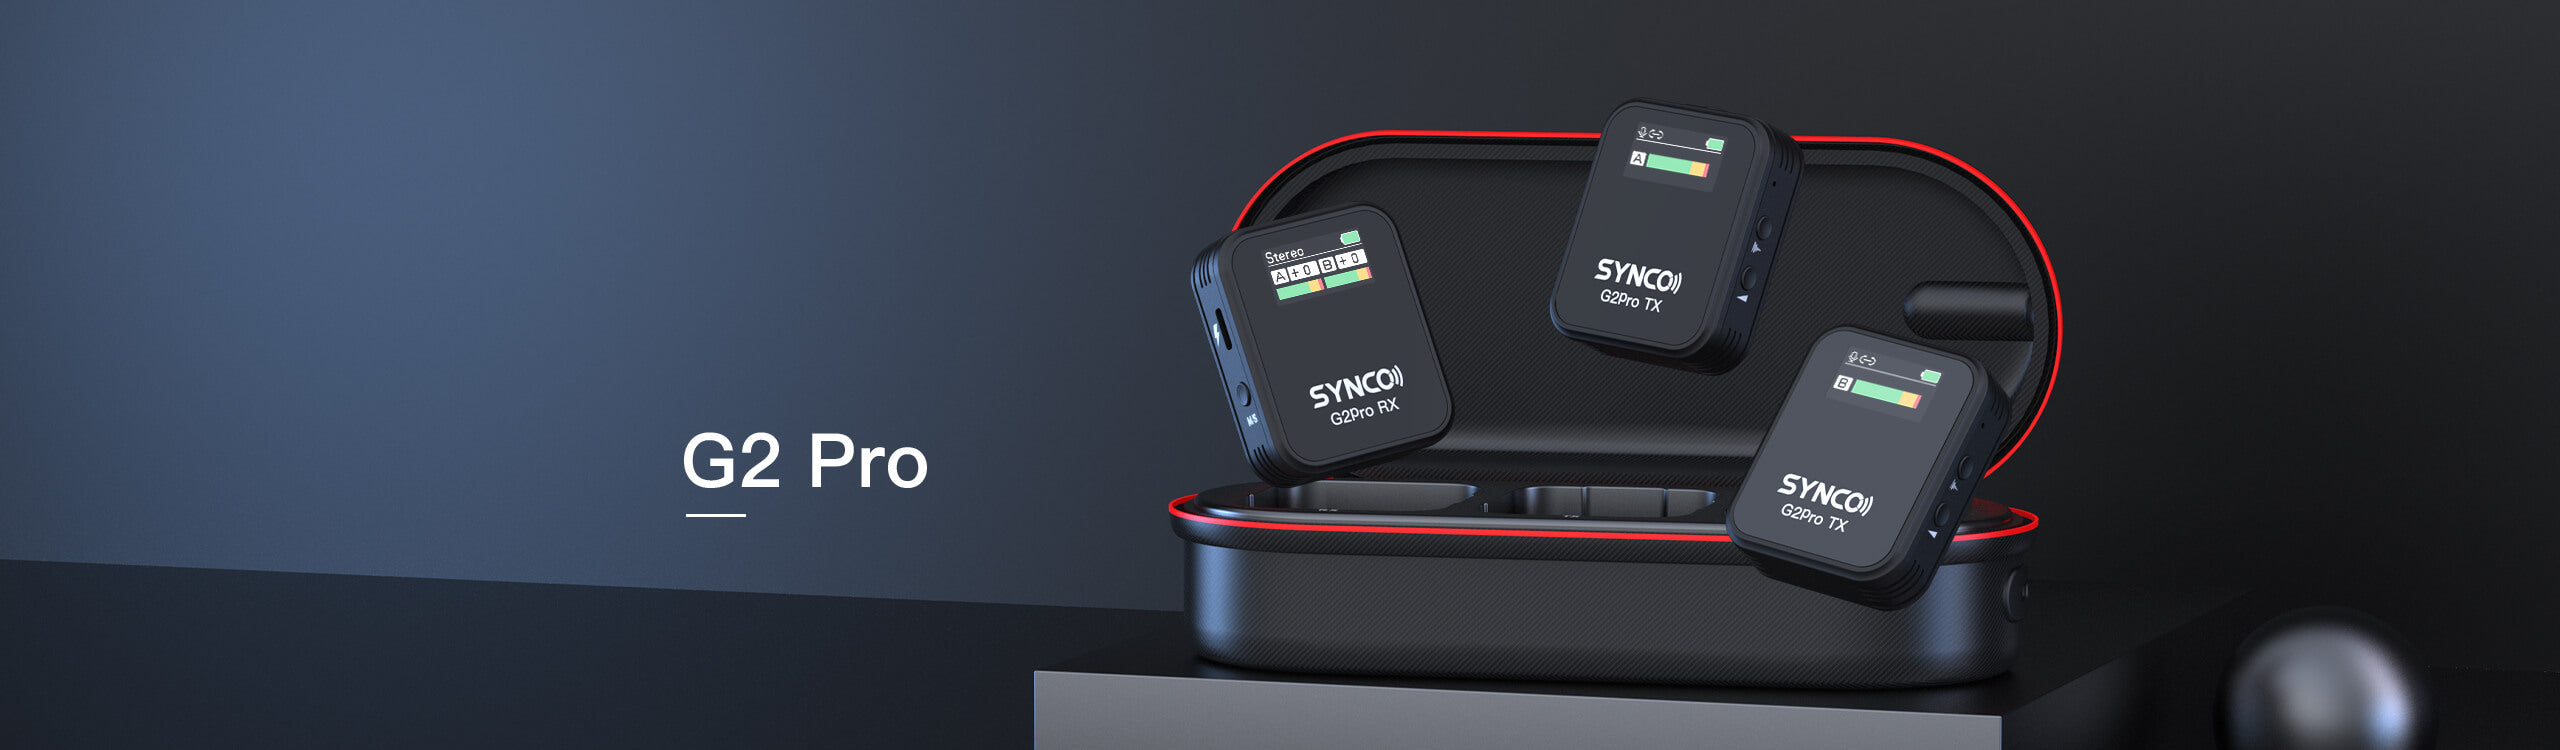 SYNCO G2 Pro long range wireless microphone includes two transmitters, a receiver, and a carrying & charging box.